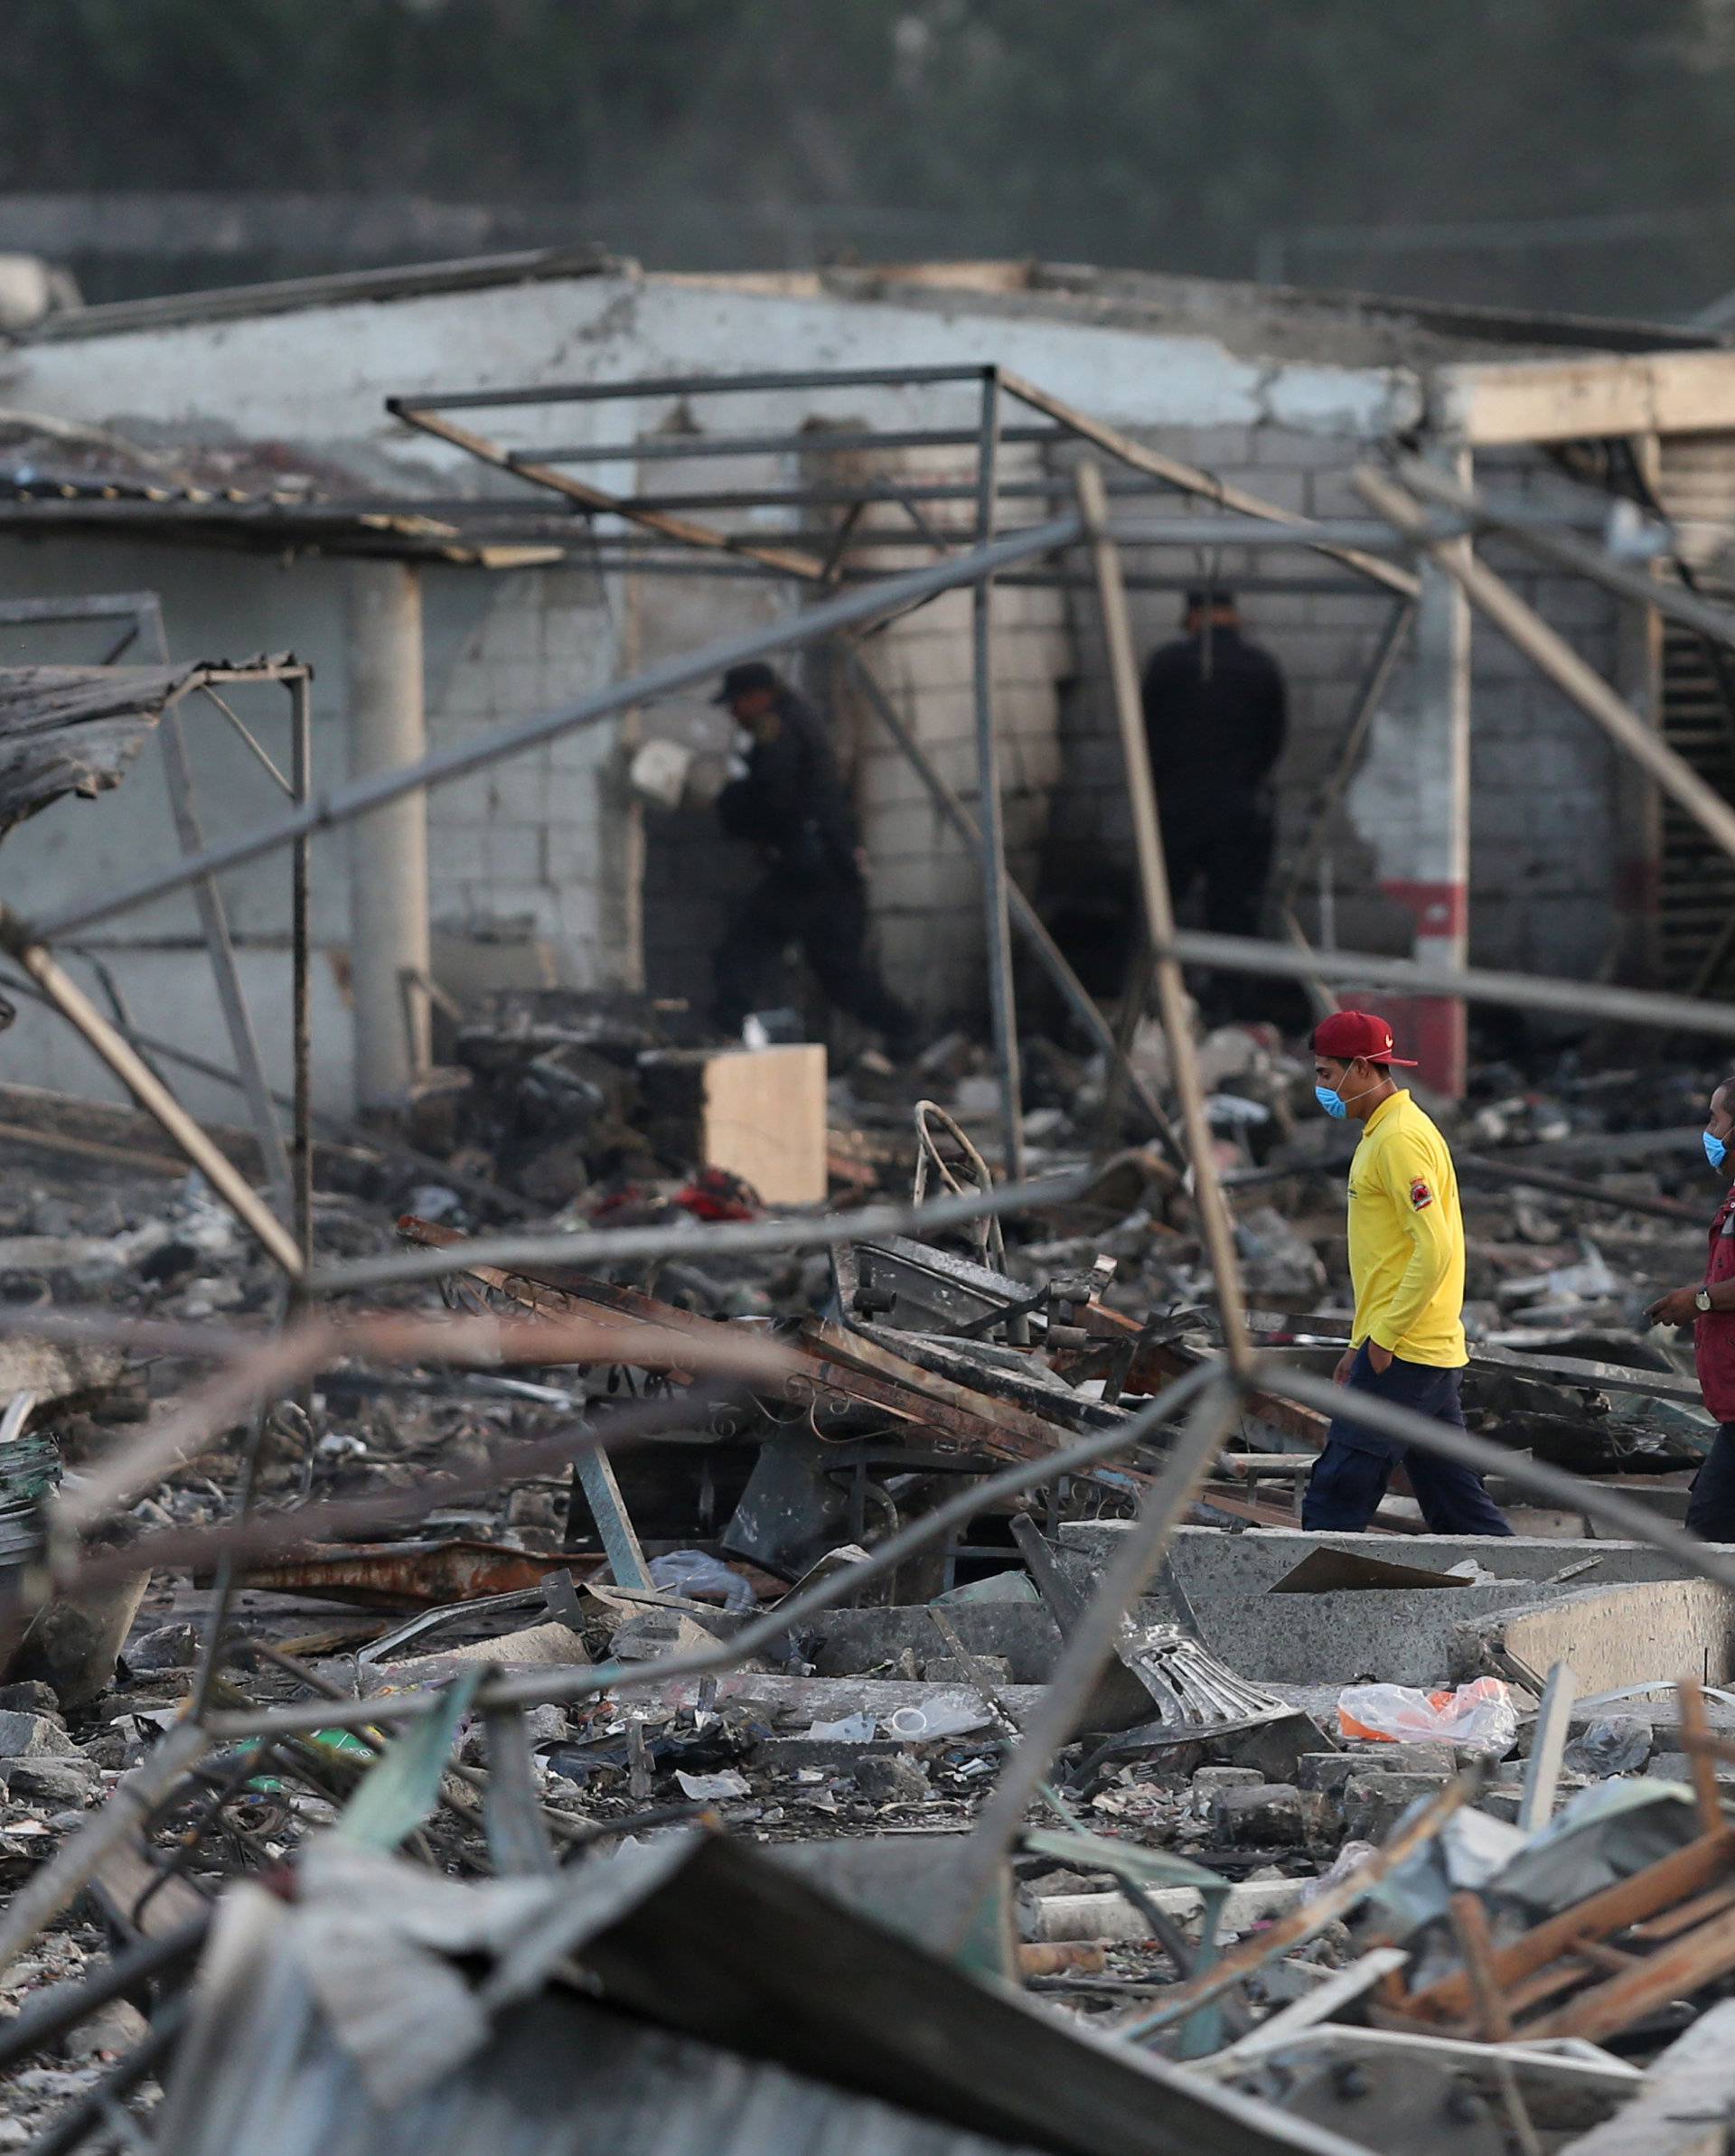 People walk amidst the remains of houses destroyed in an explosion at the San Pablito fireworks market in Tultepec